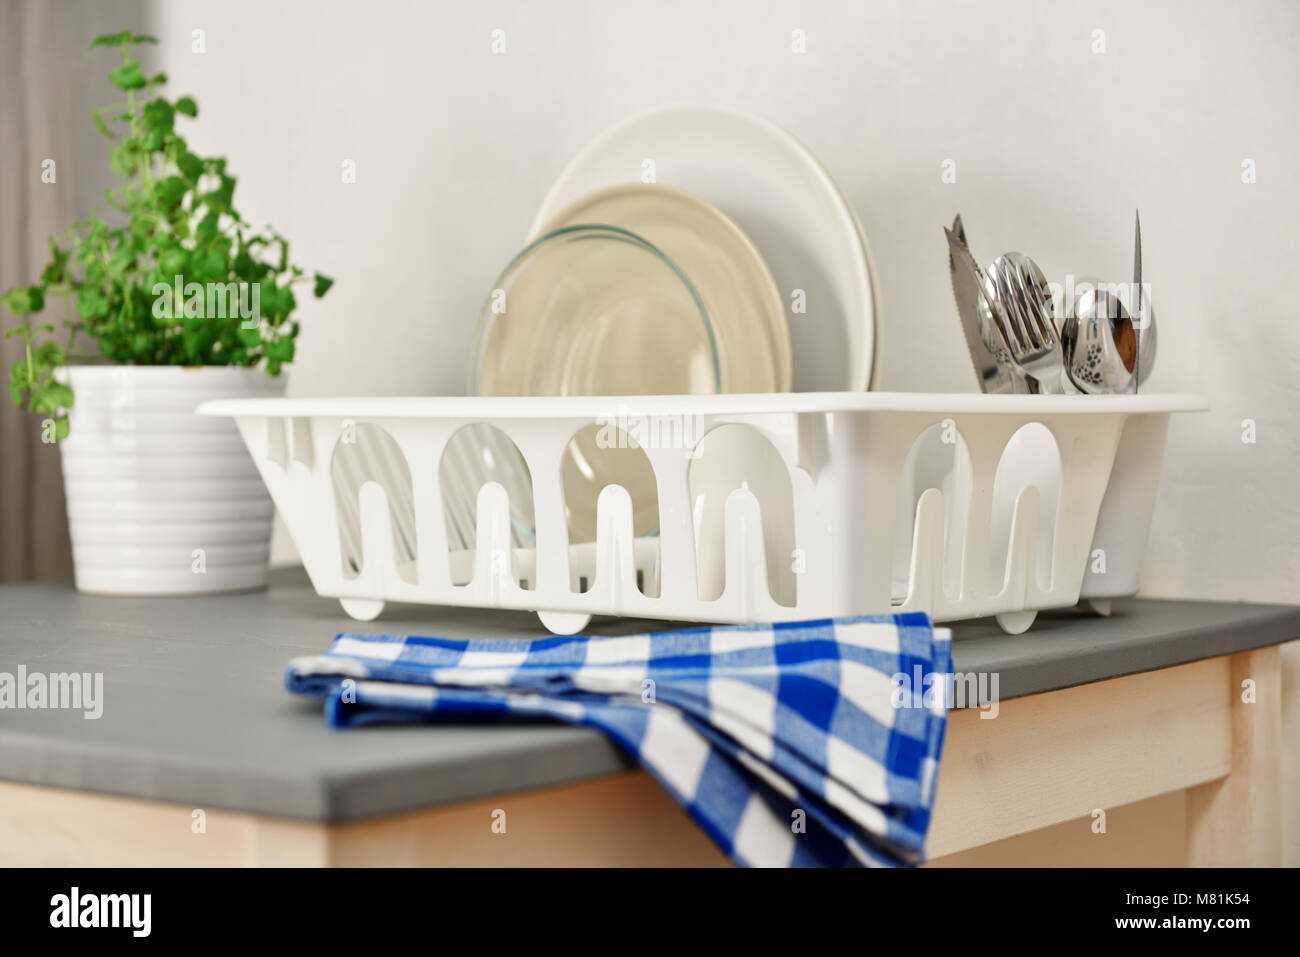 https://c8.alamy.com/comp/M81K54/dish-drainer-with-plates-and-silverware-on-a-table-focus-on-the-dish-M81K54.jpg